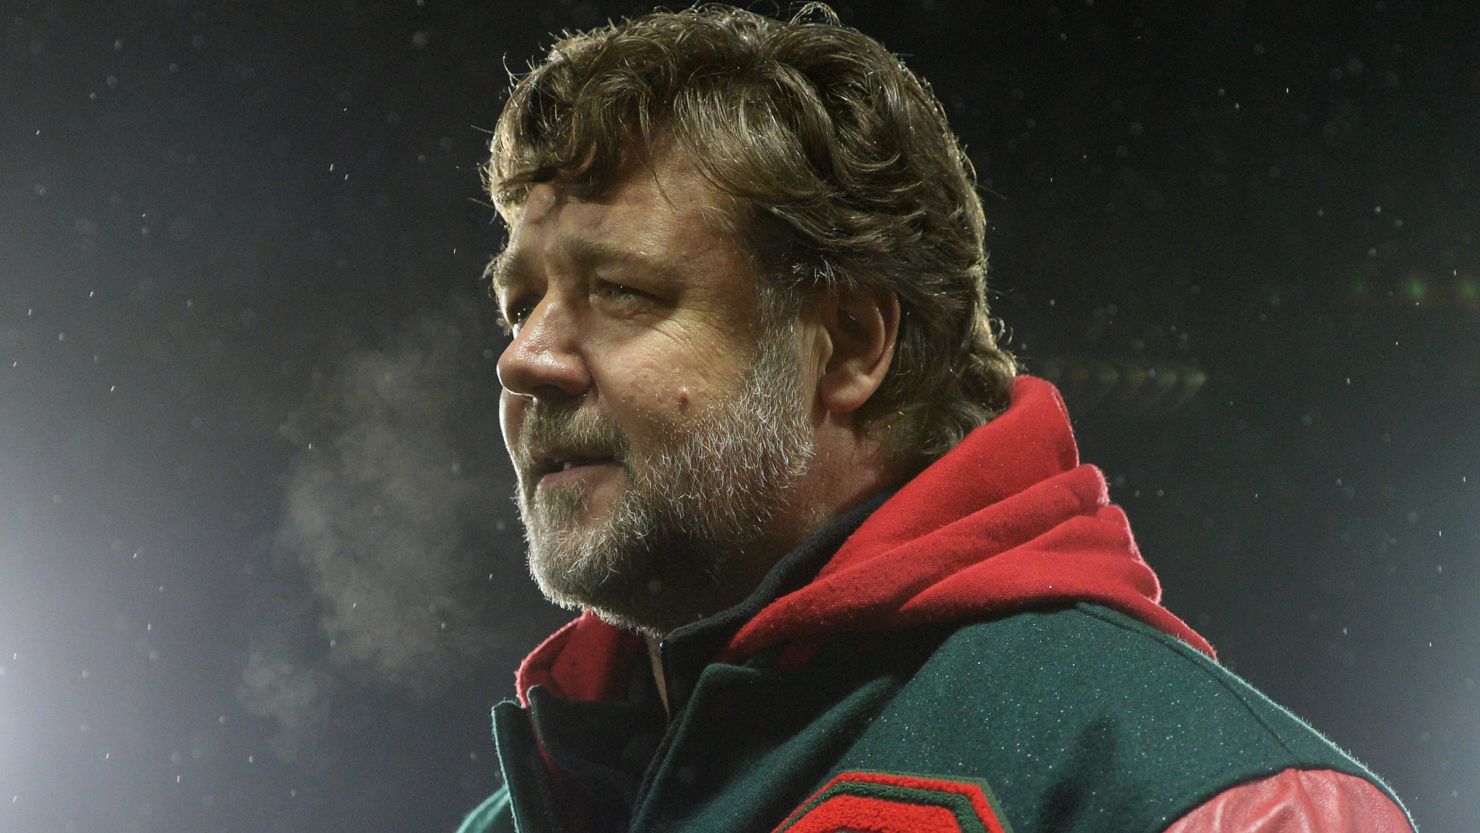 Russell Crowe saw South Sydney Rabbitohs defeat St Helens 39-0 Sunday.